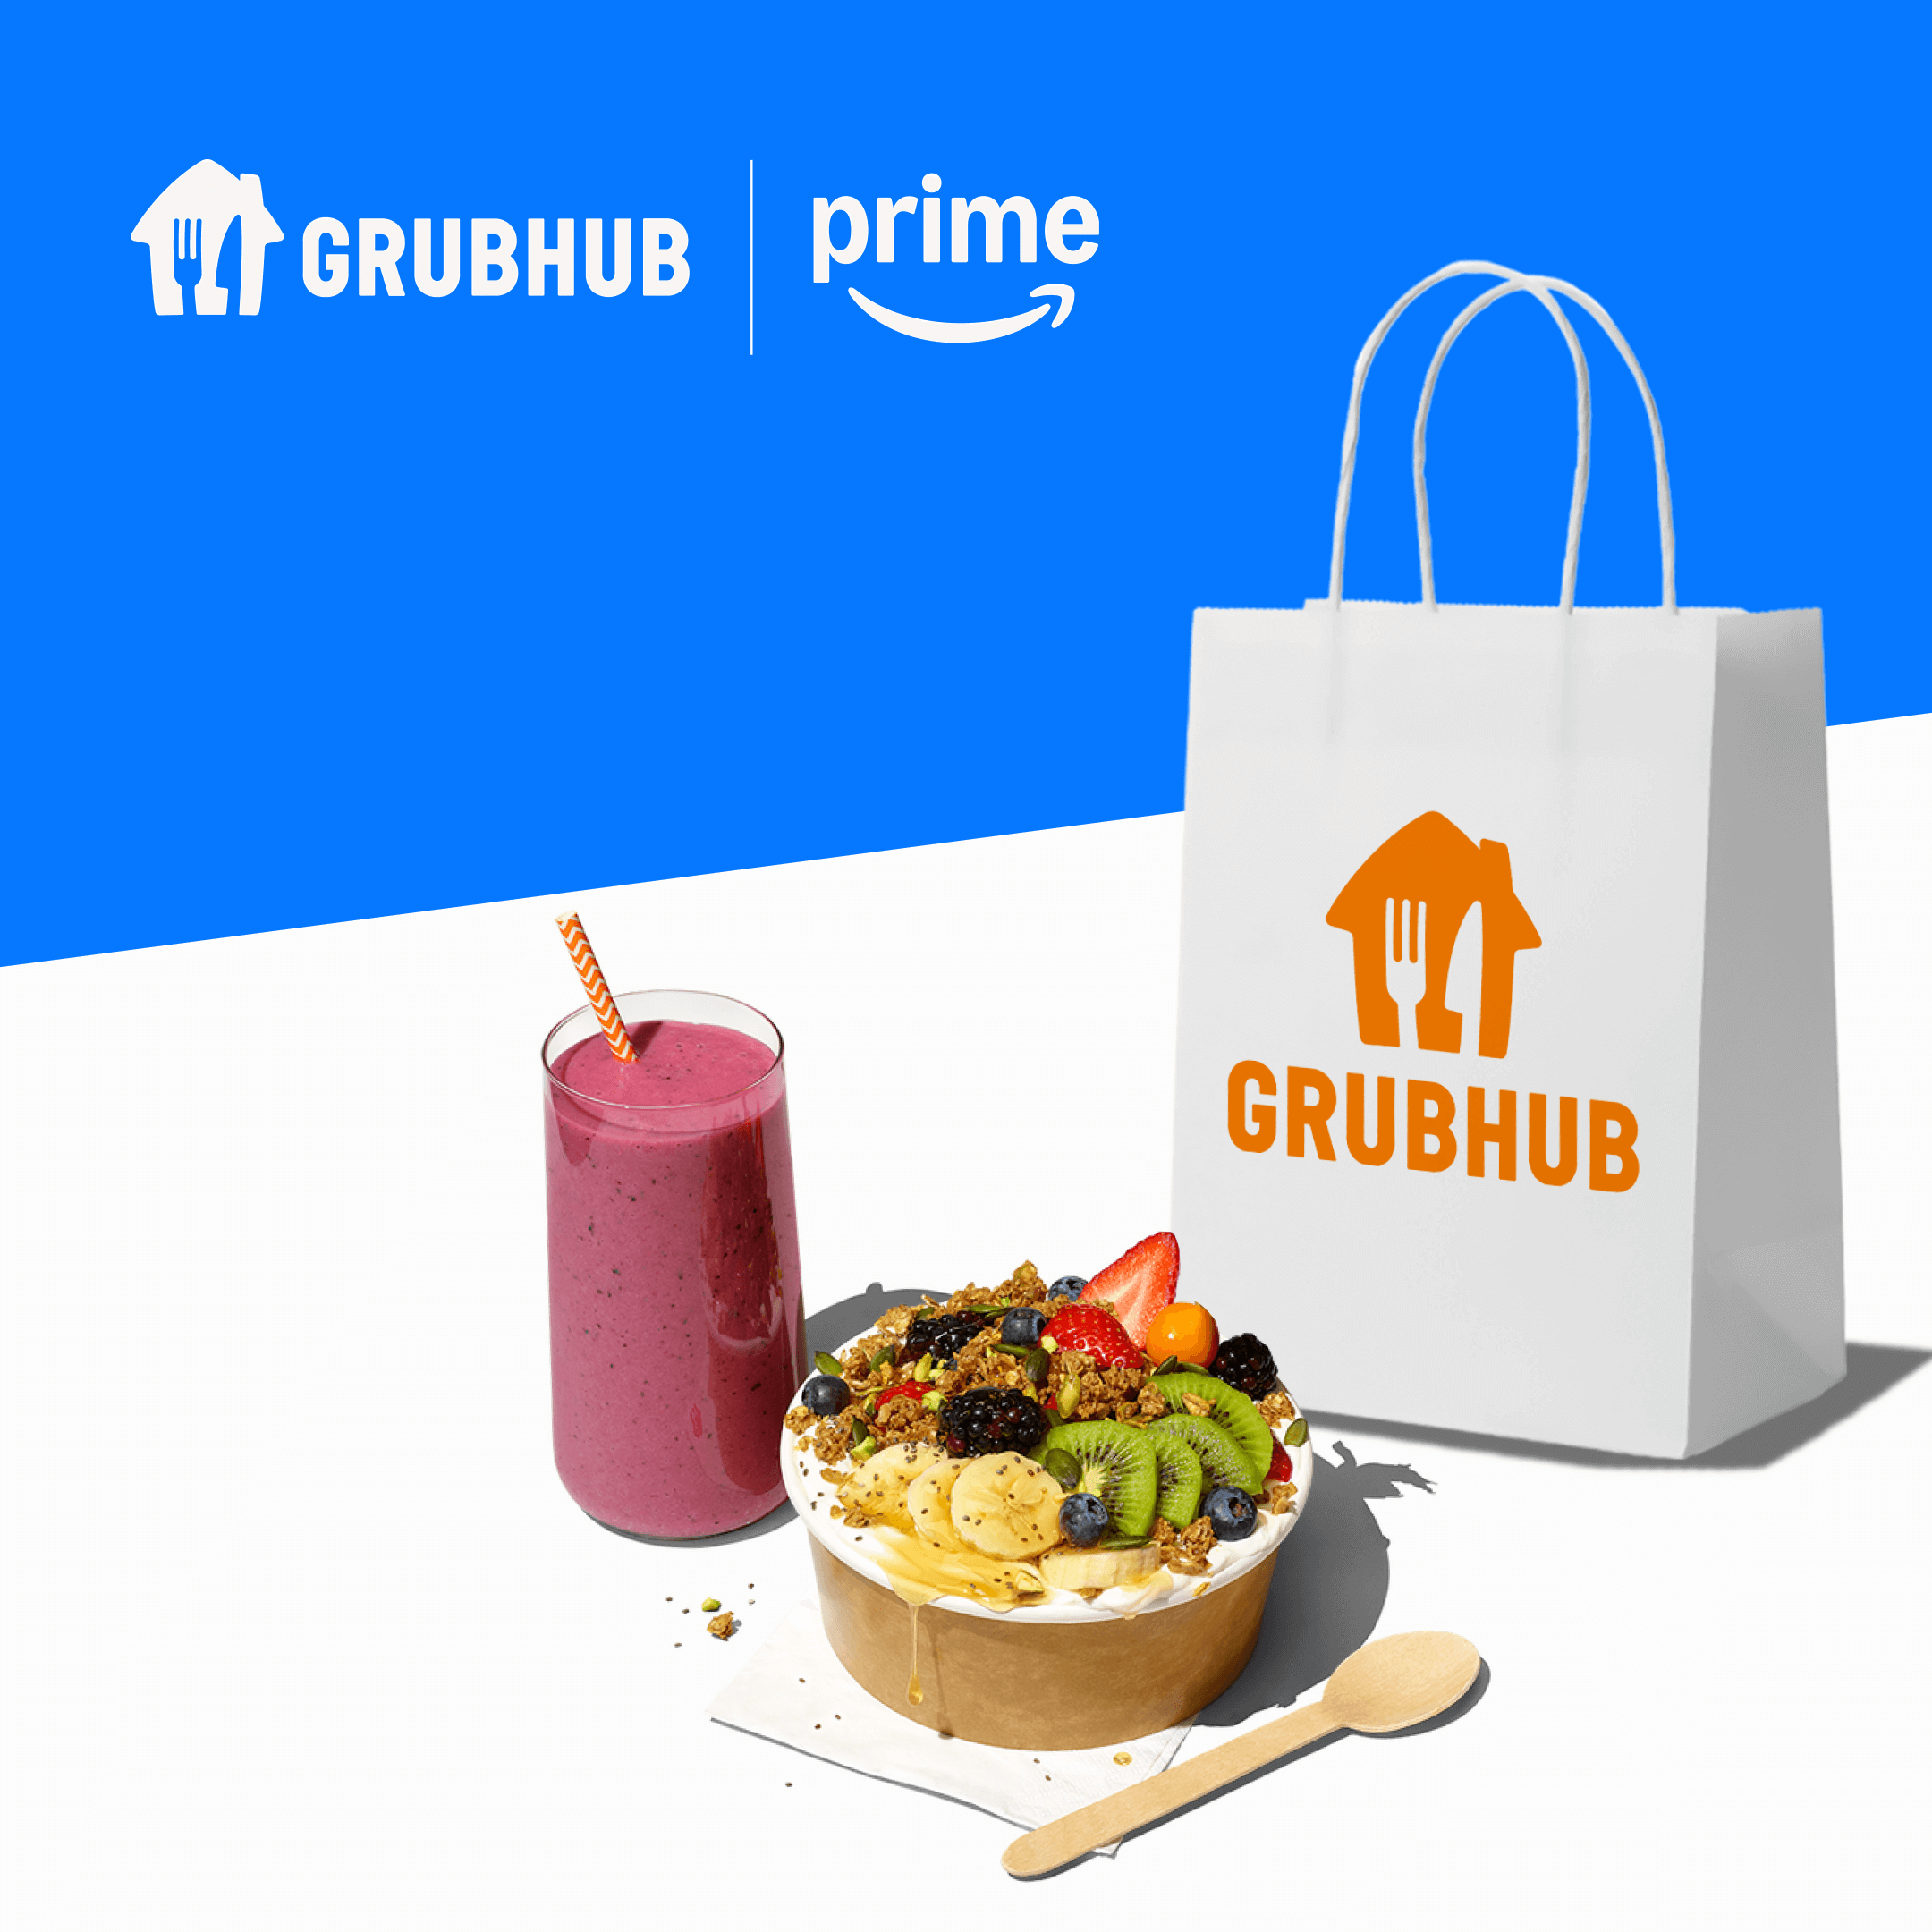 Amazon Announces Grubhub+ as Ongoing Prime Member Offer; Customers Can Now Order Grubhub Directly from Amazon.com and the Amazon Shopping App